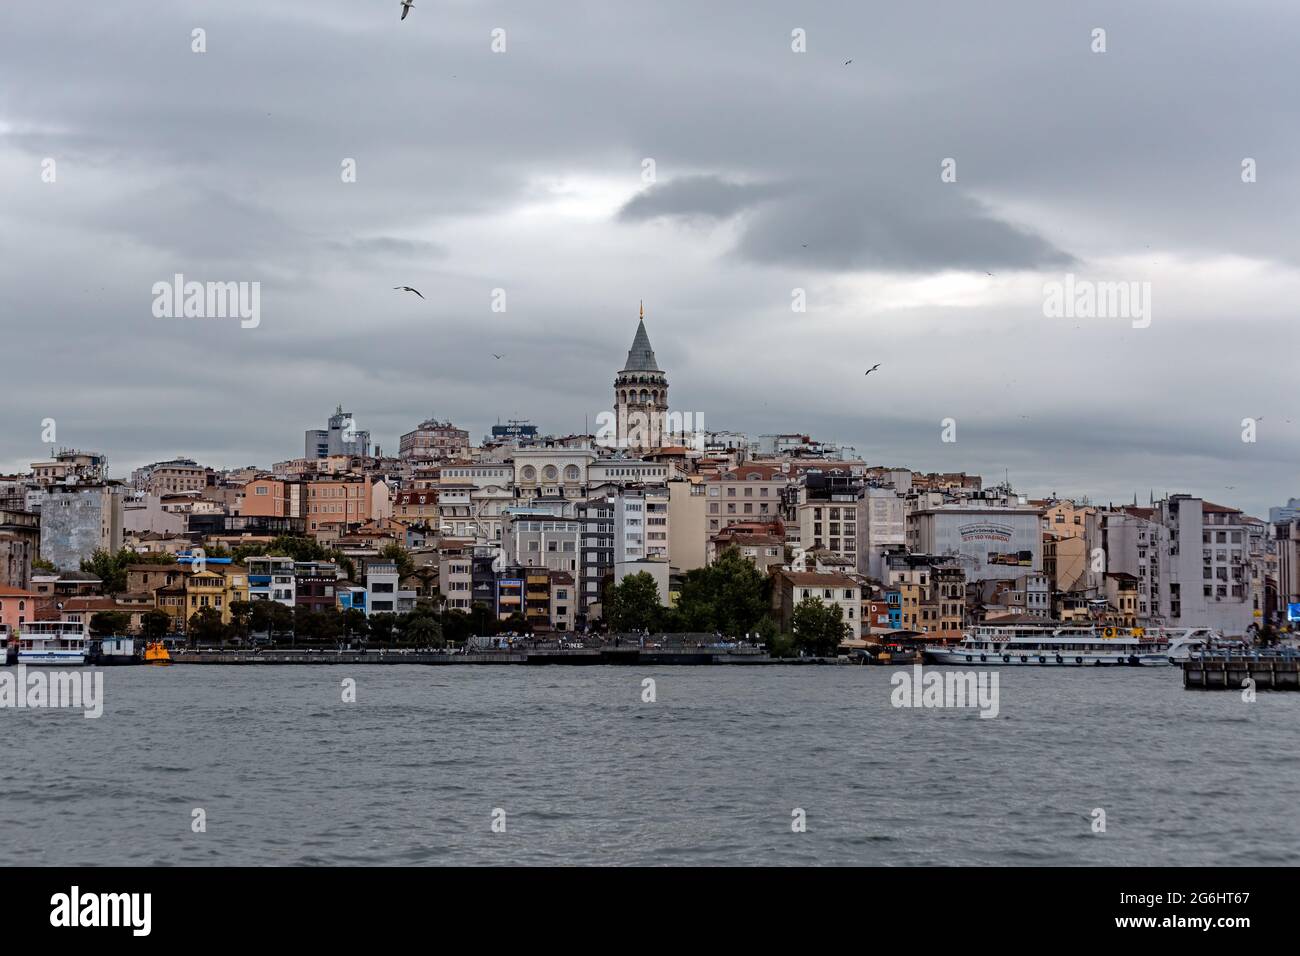 Galata Tower within residential buildings in old town. Karakoy coastal view from Bosporus. Sea and Golden Horn on a cloudy day. Stock Photo